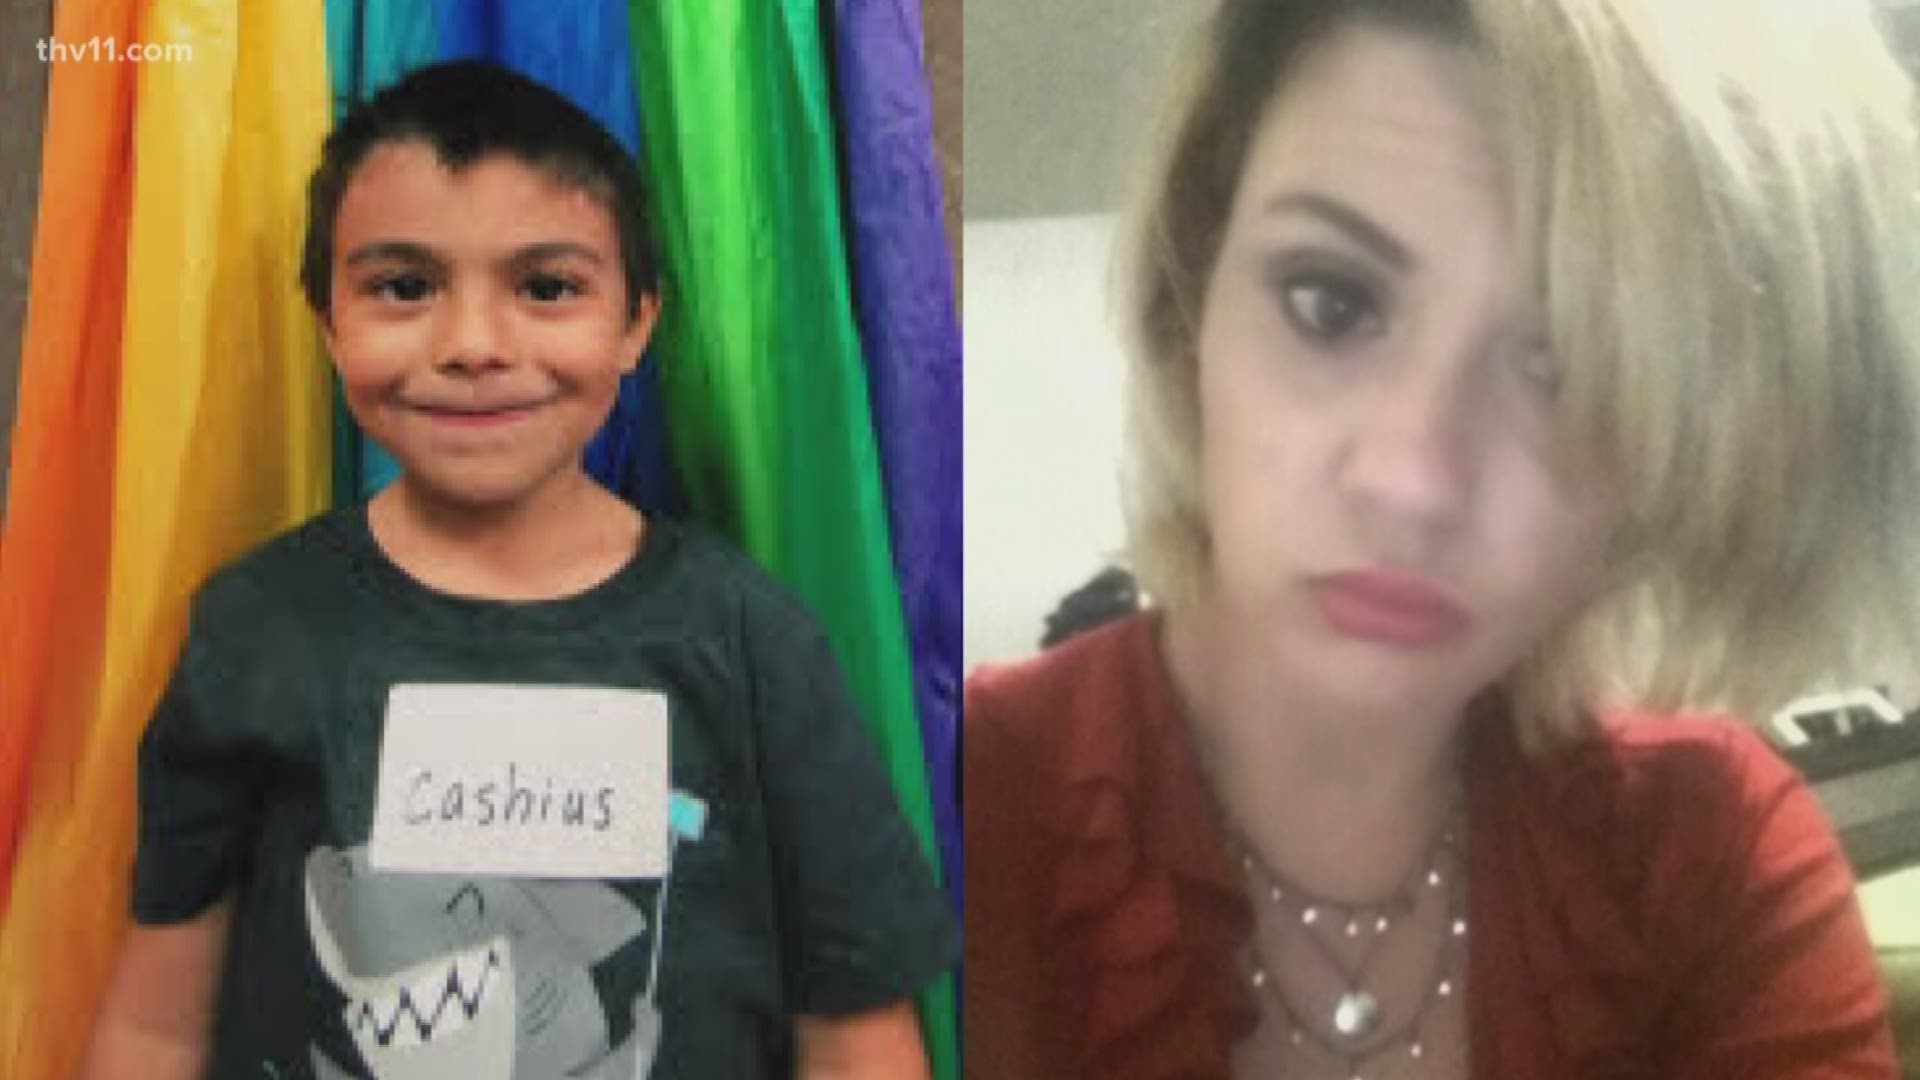 The Benton Police Department is searching for missing 5-year-old Cashius Manriquez and his 32-year-old mother Allison Hunt.